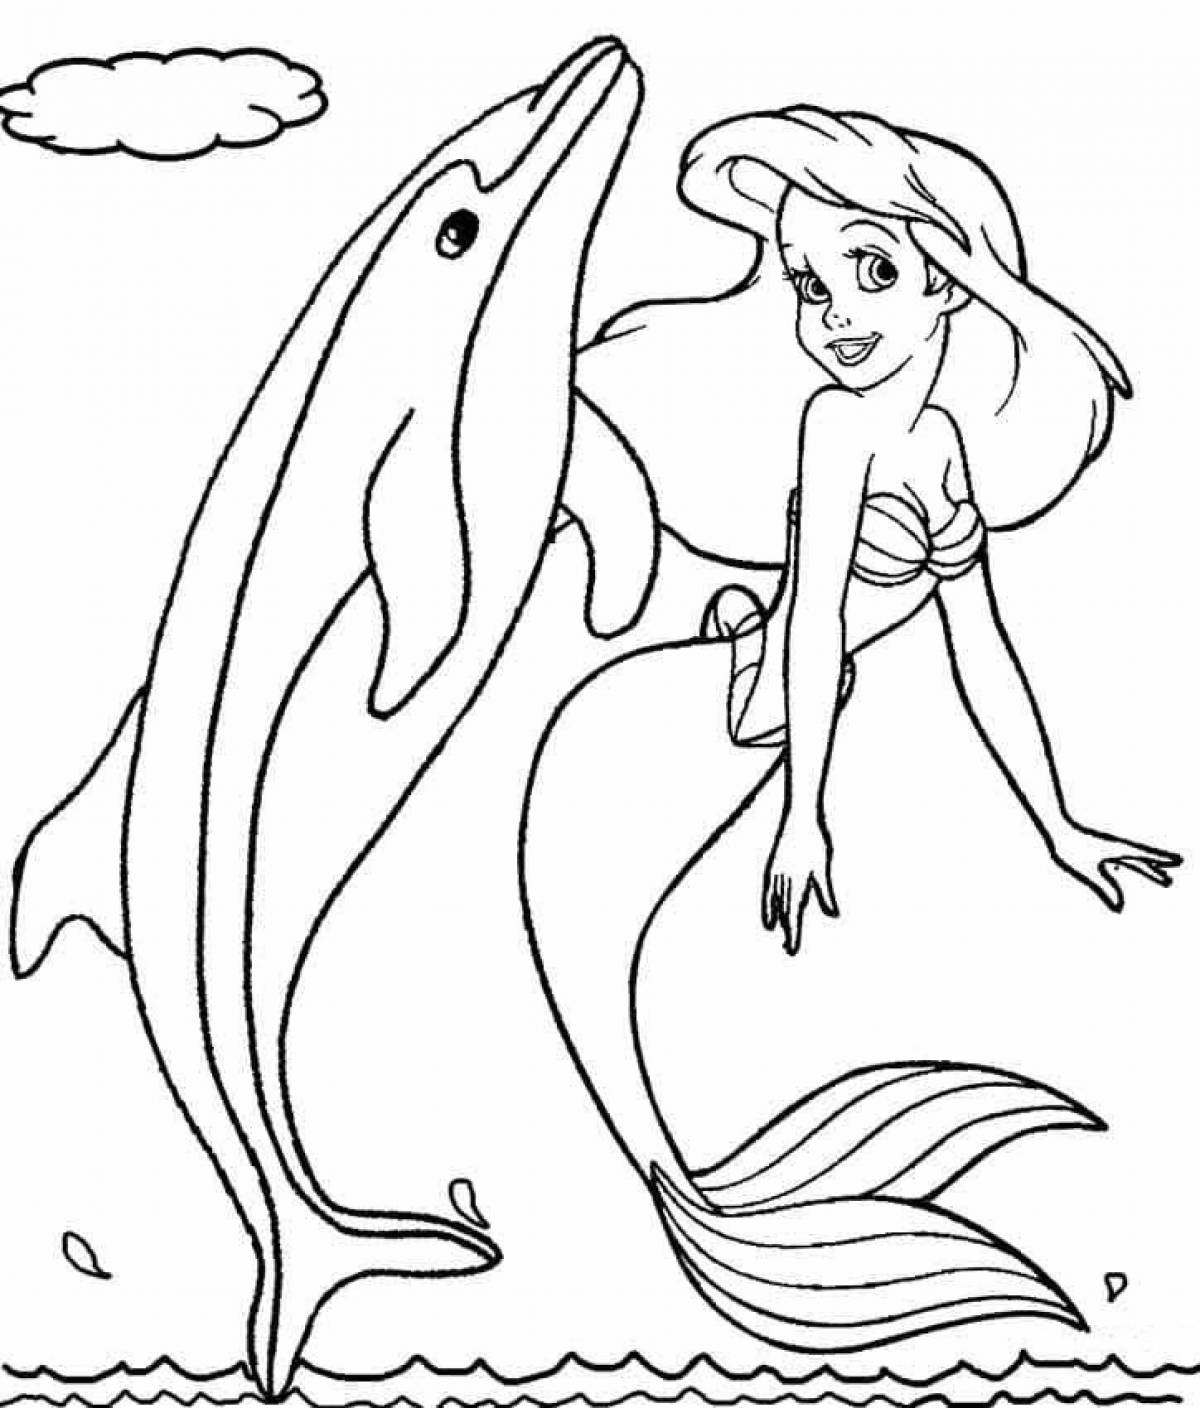 Whimsical little mermaid coloring book for kids